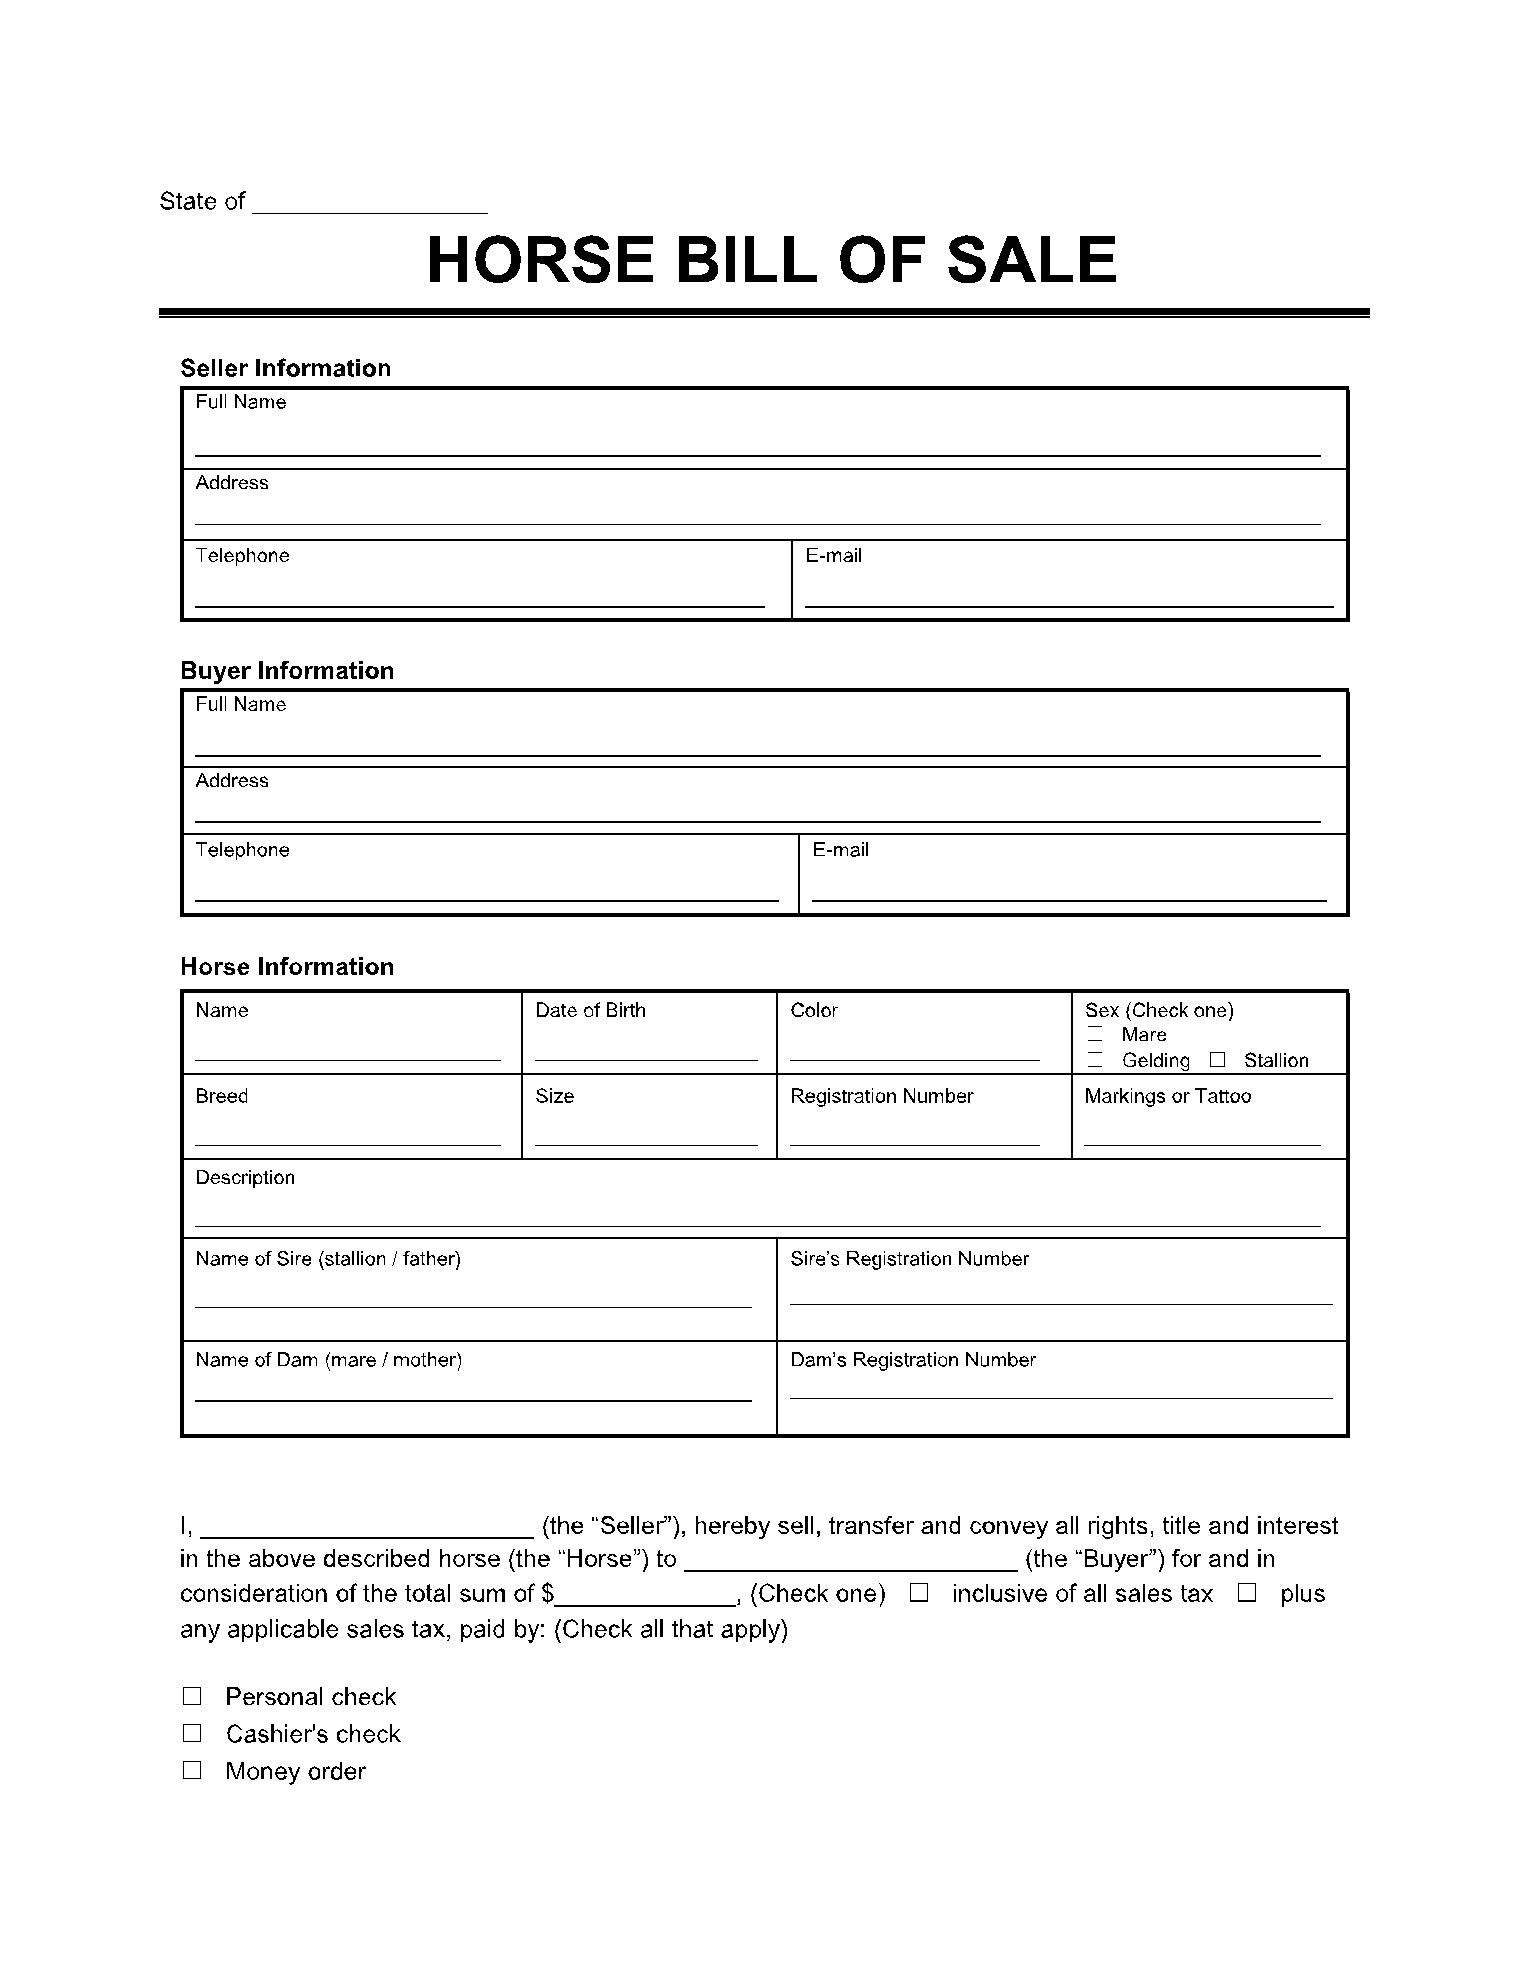 Horse Bill of Sale 1